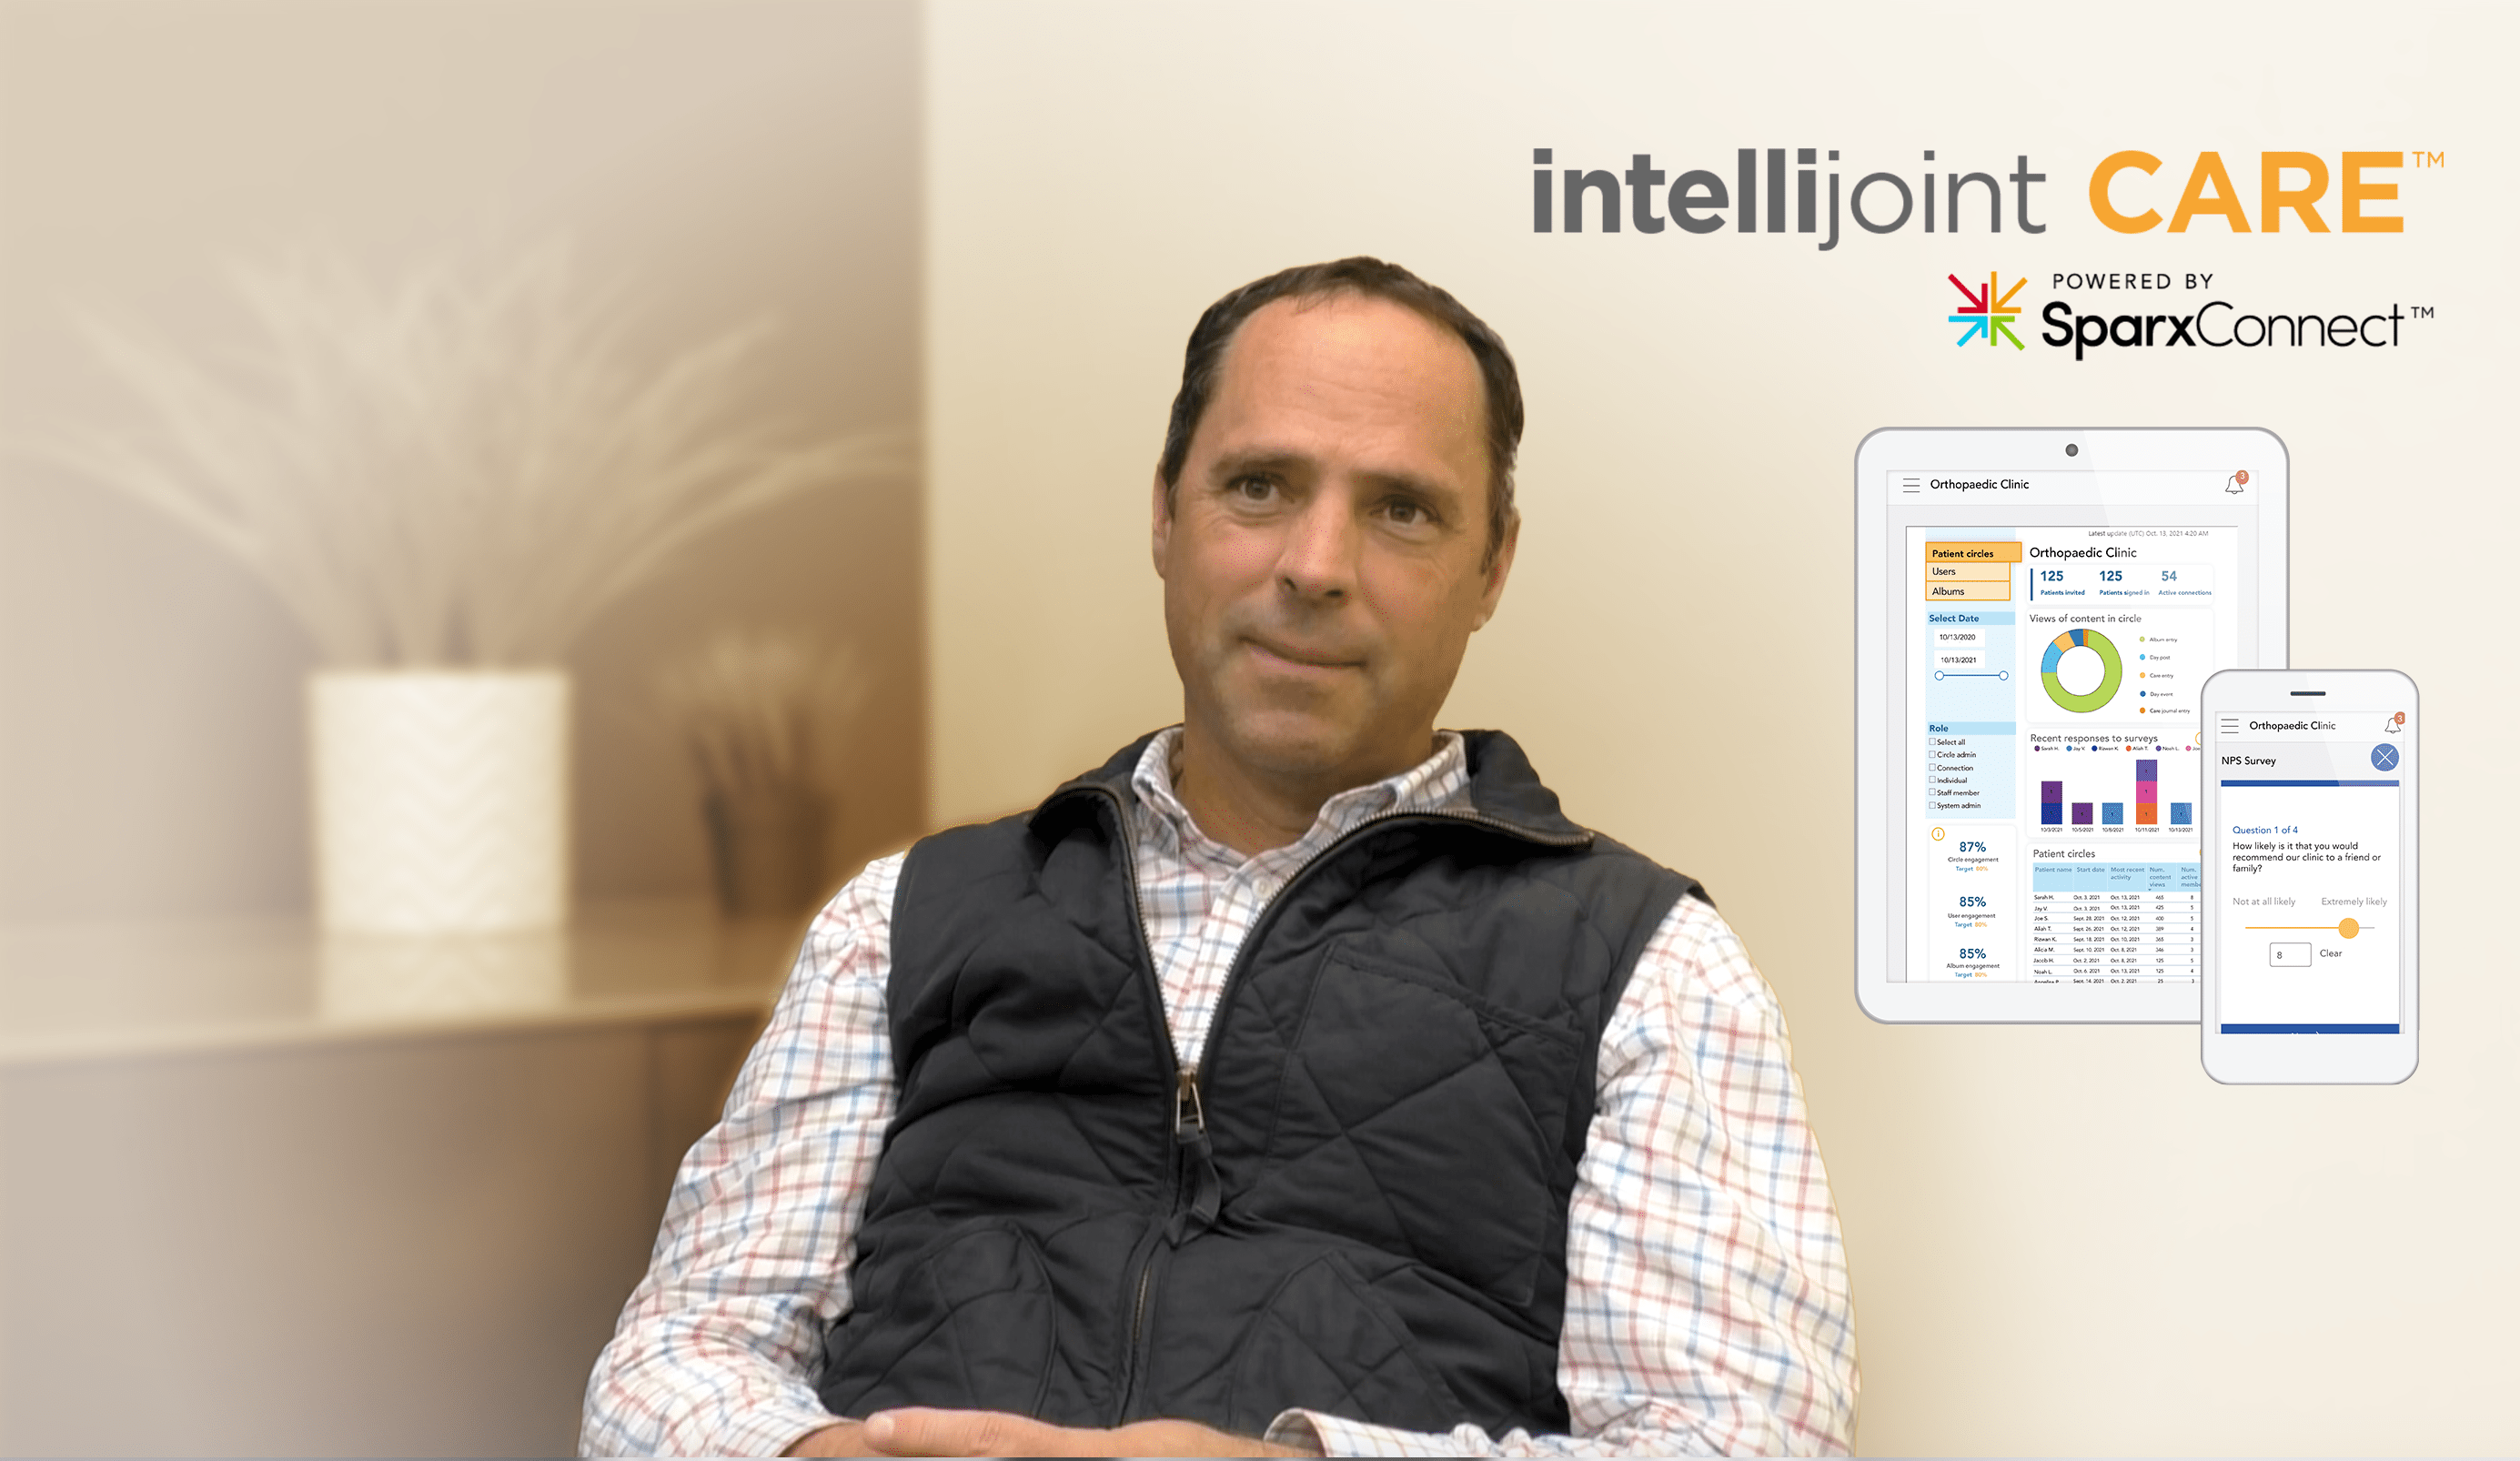 Dr. Bradley sitting with a screenshot of the Intellijoint CARE on the side